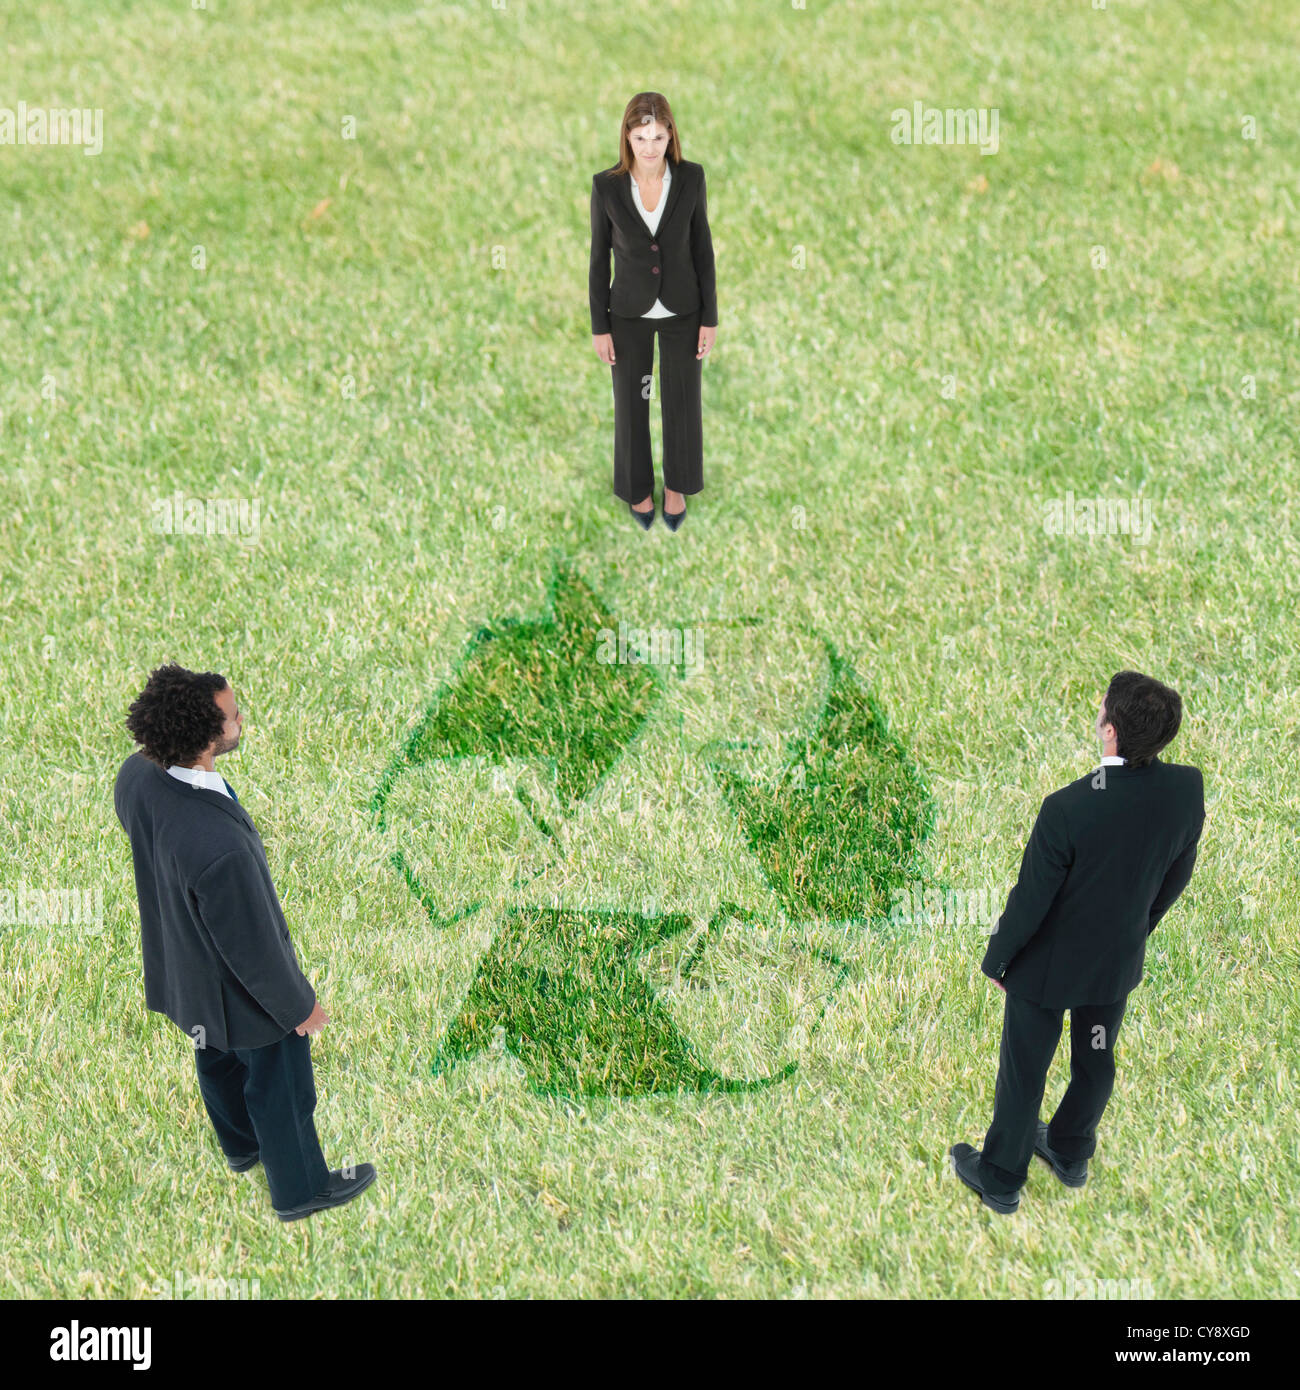 Business leaders collaborate and address environmental concerns by embracing recycling Stock Photo